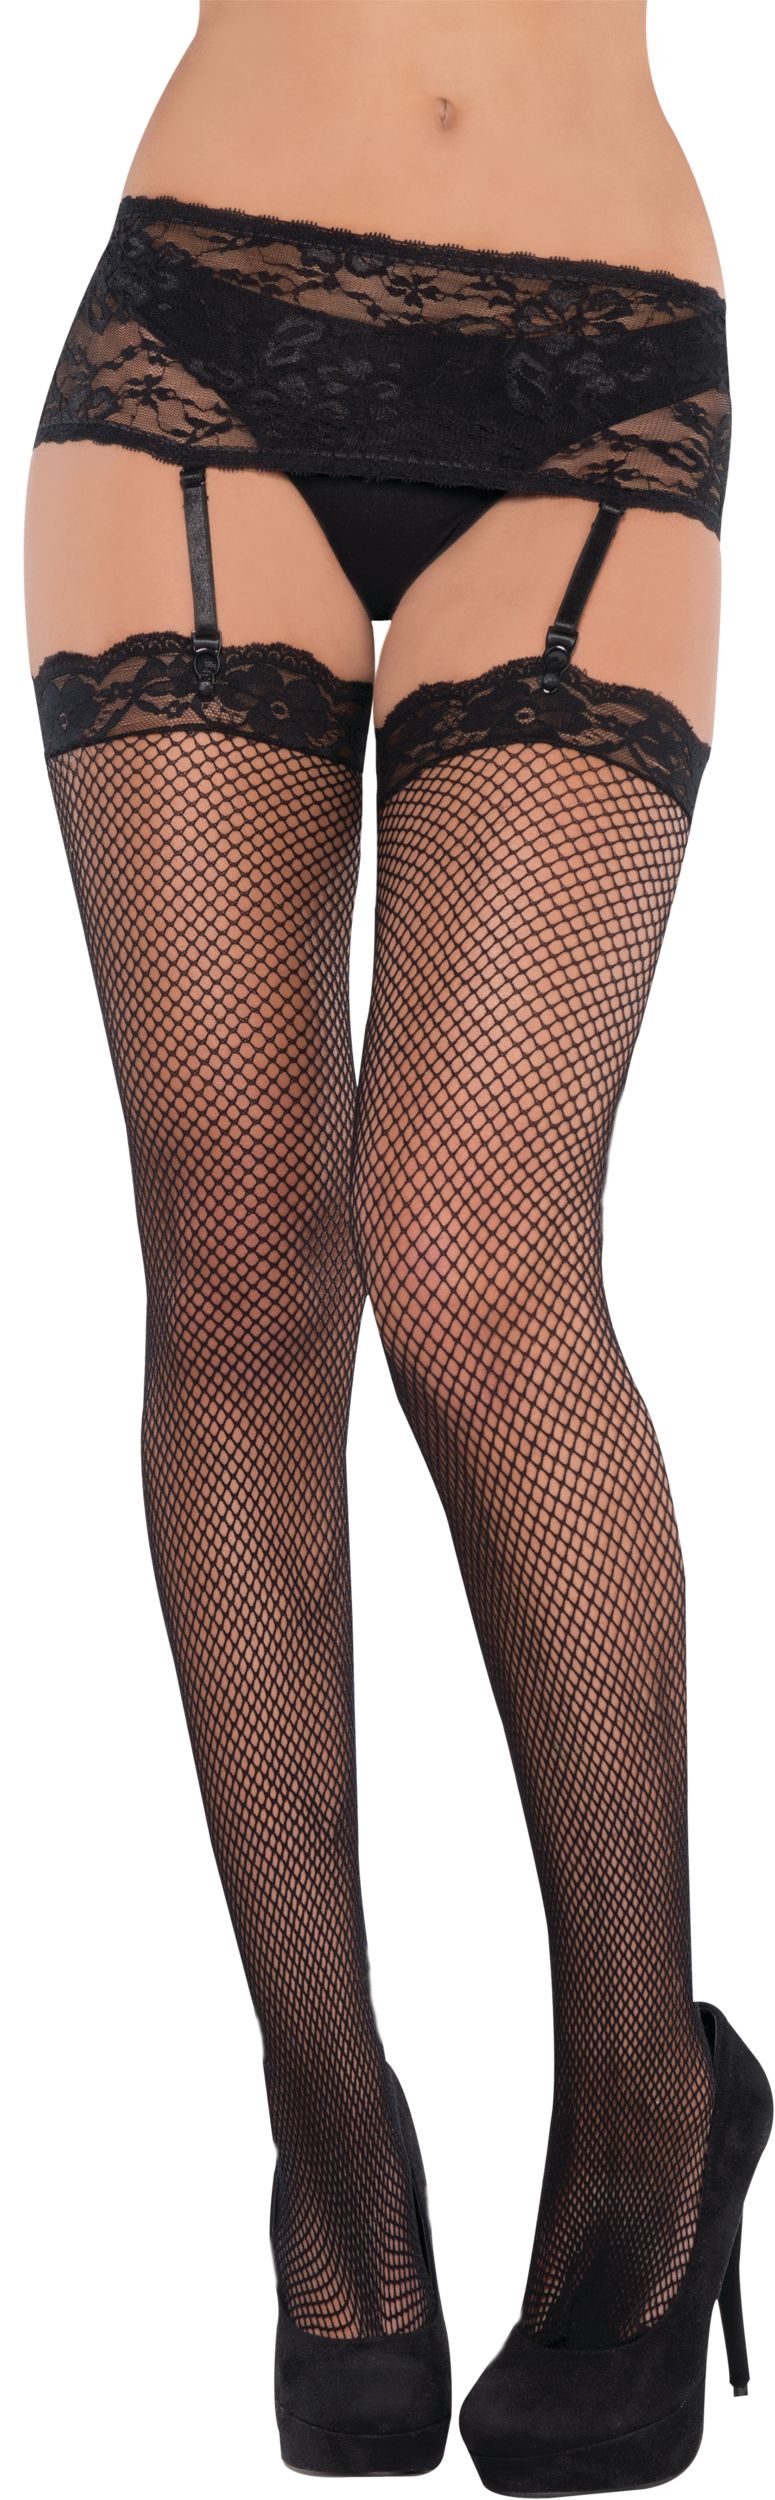 Adult Garter Belt Set with Fishnet Stocking Tights, Black, One Size,  Wearable Costume Accessory for Halloween